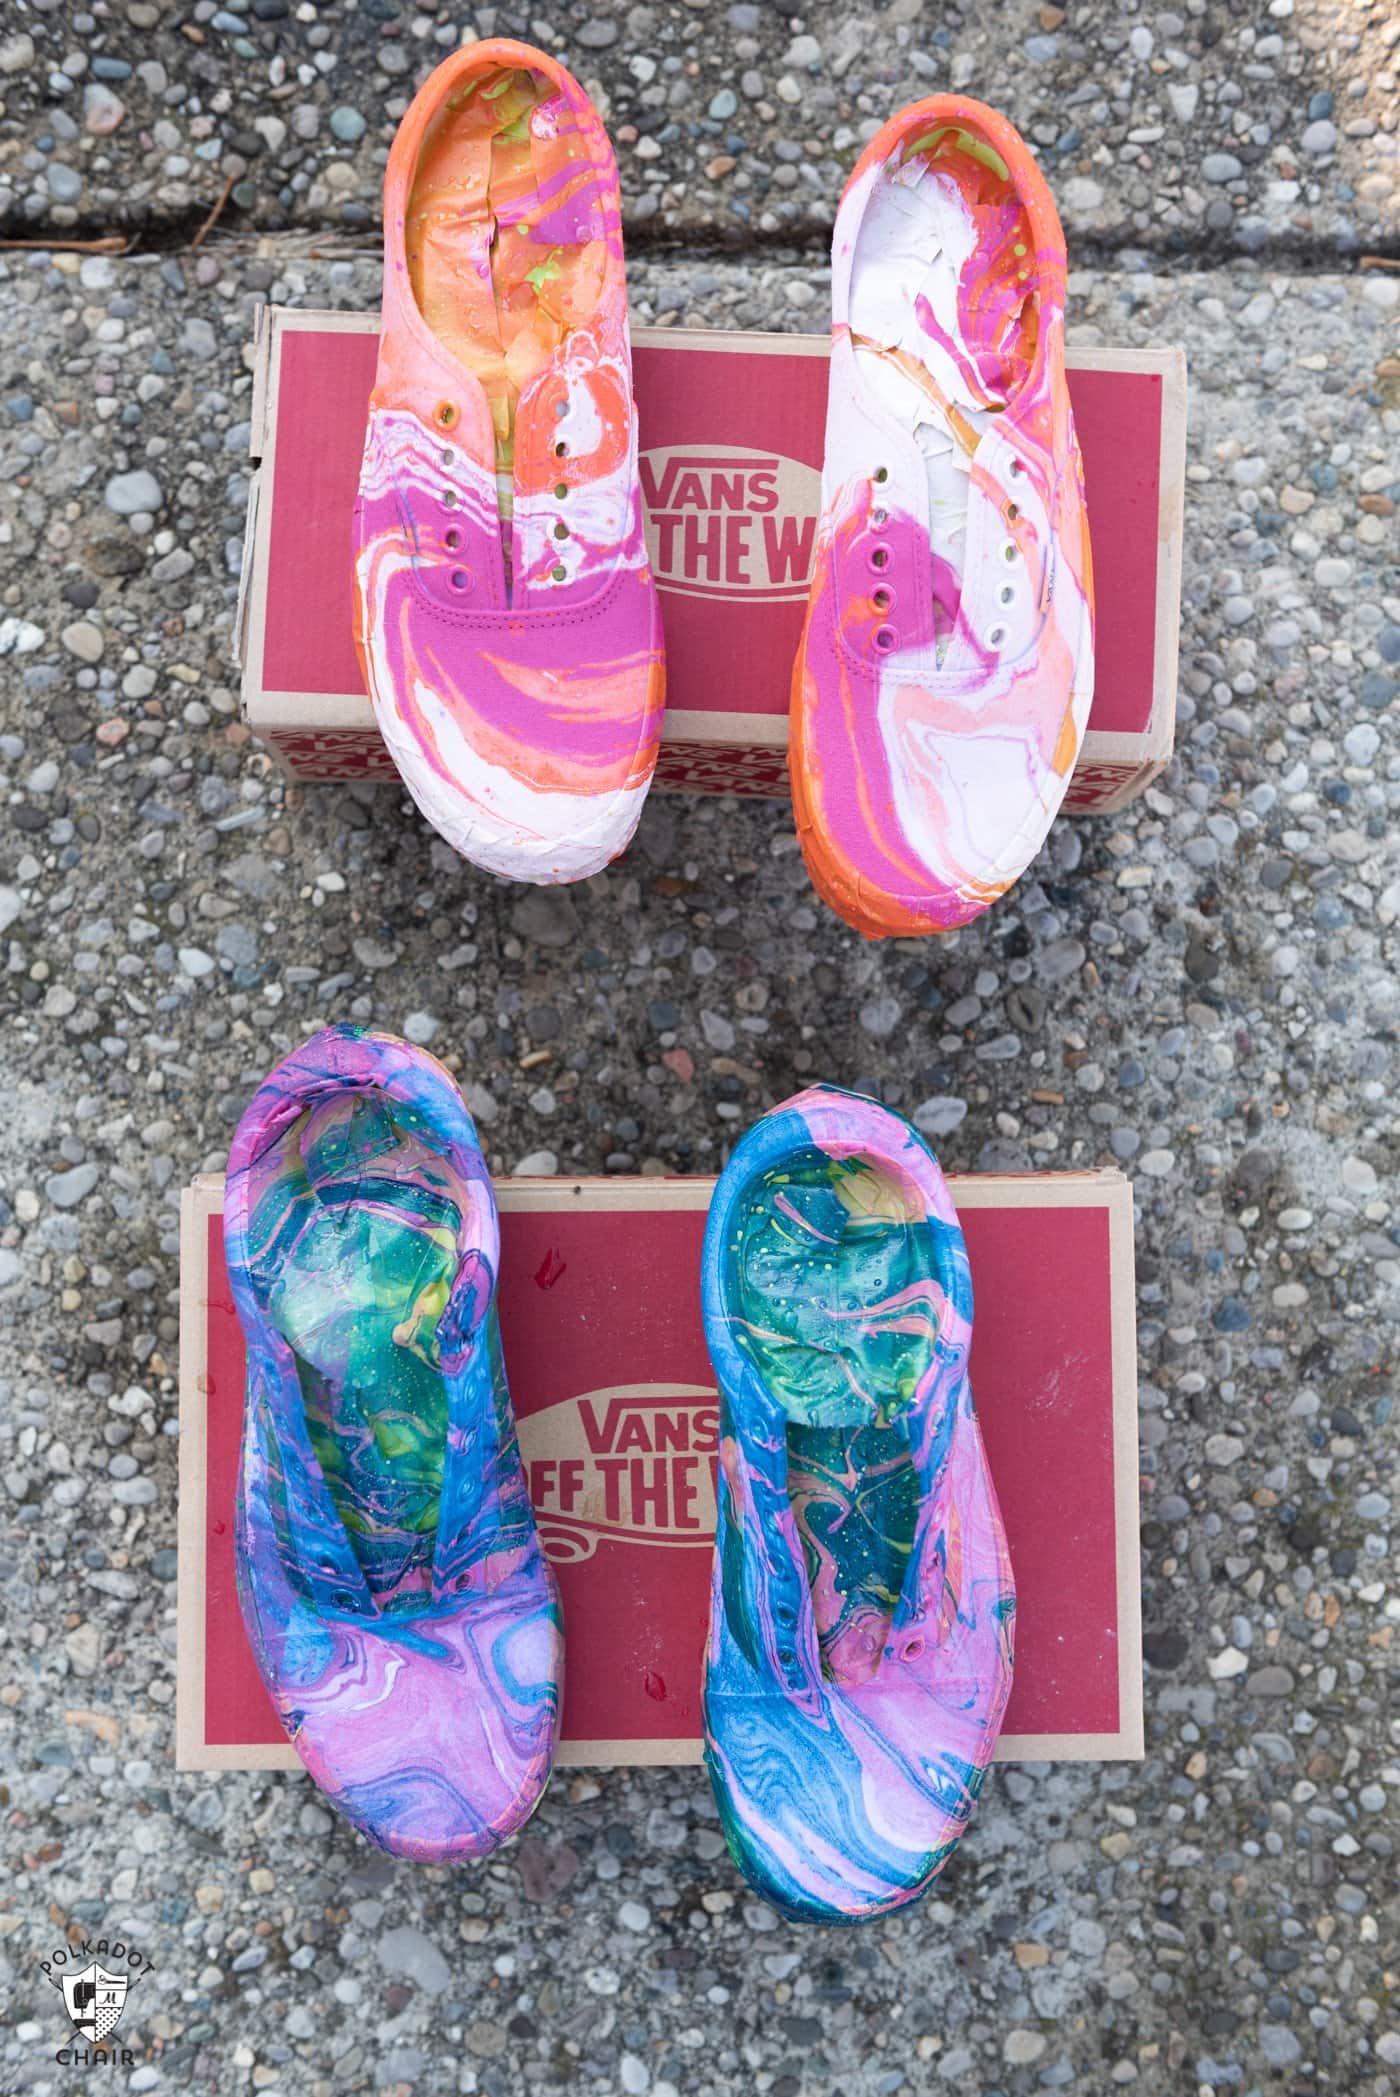 White orange and pink, and blue and pink  hydro dipped vans drying in the sun on a shoe box after being dipped.